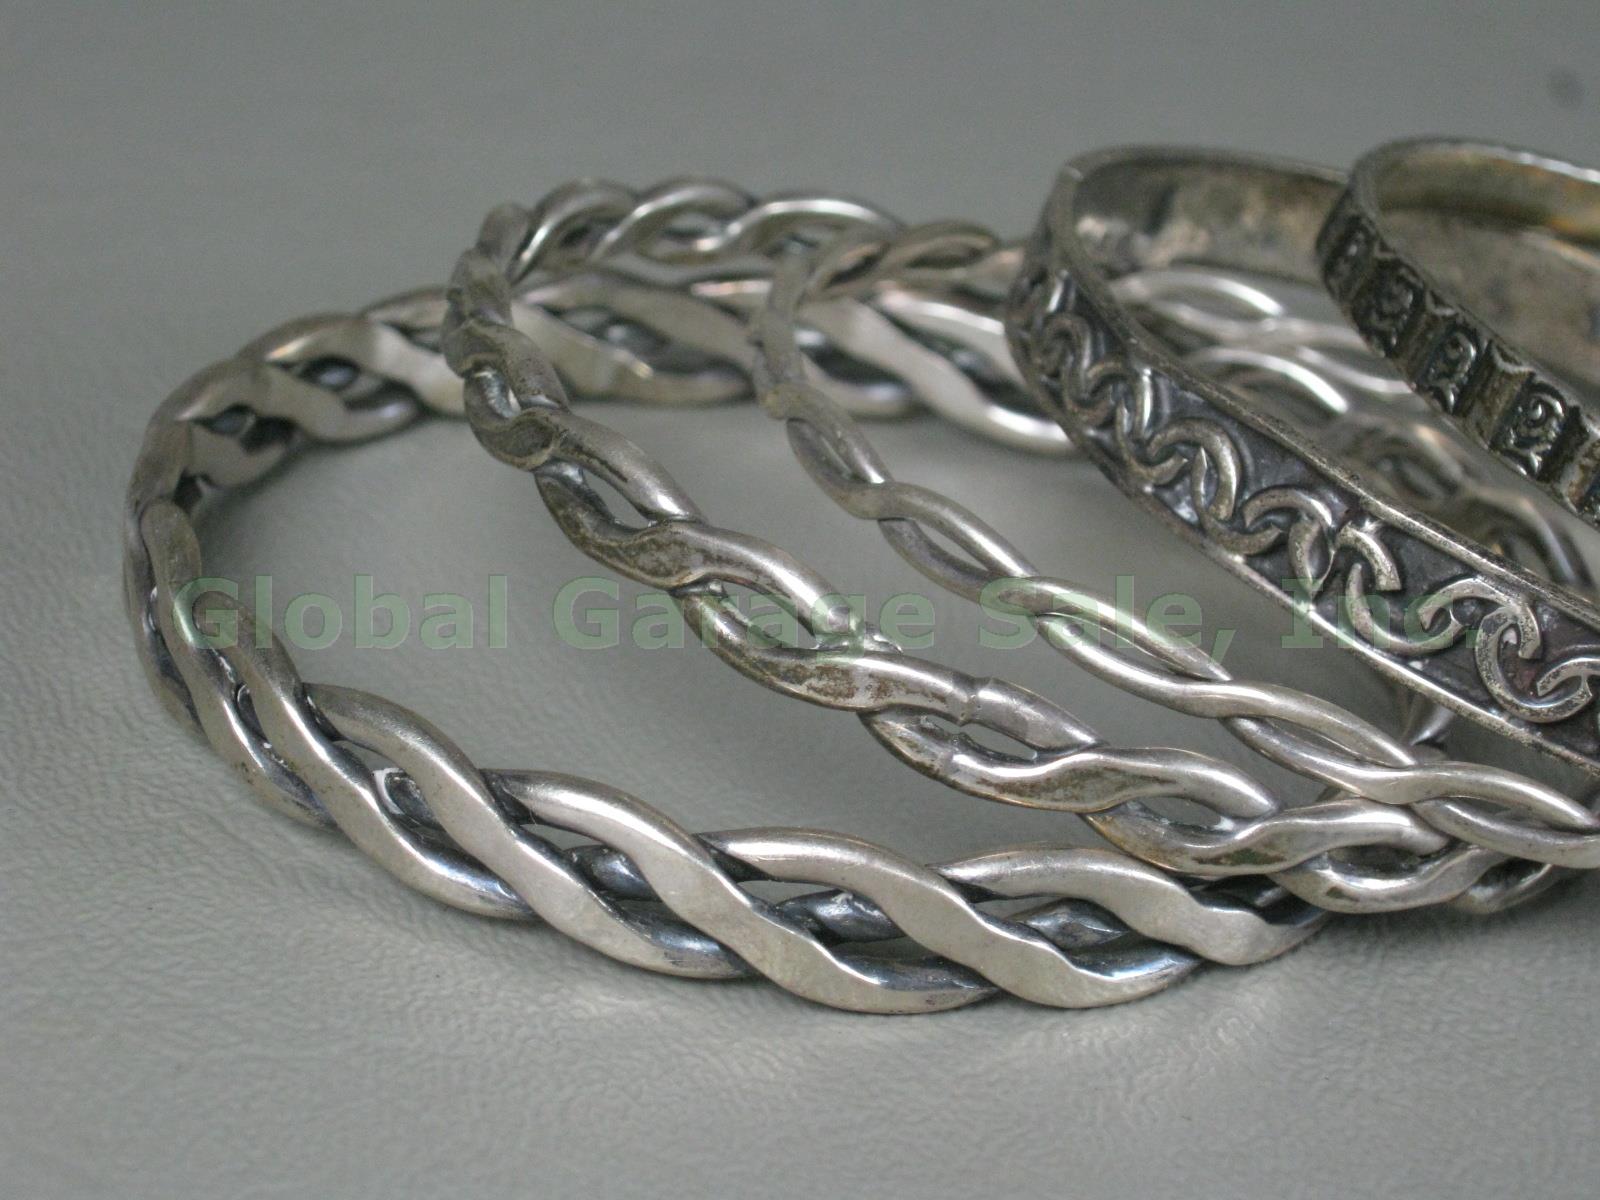 10 Vtg Sterling Silver Bangle Bracelets Lot 4.6 Ounces Braided Woven Rope Floral 1